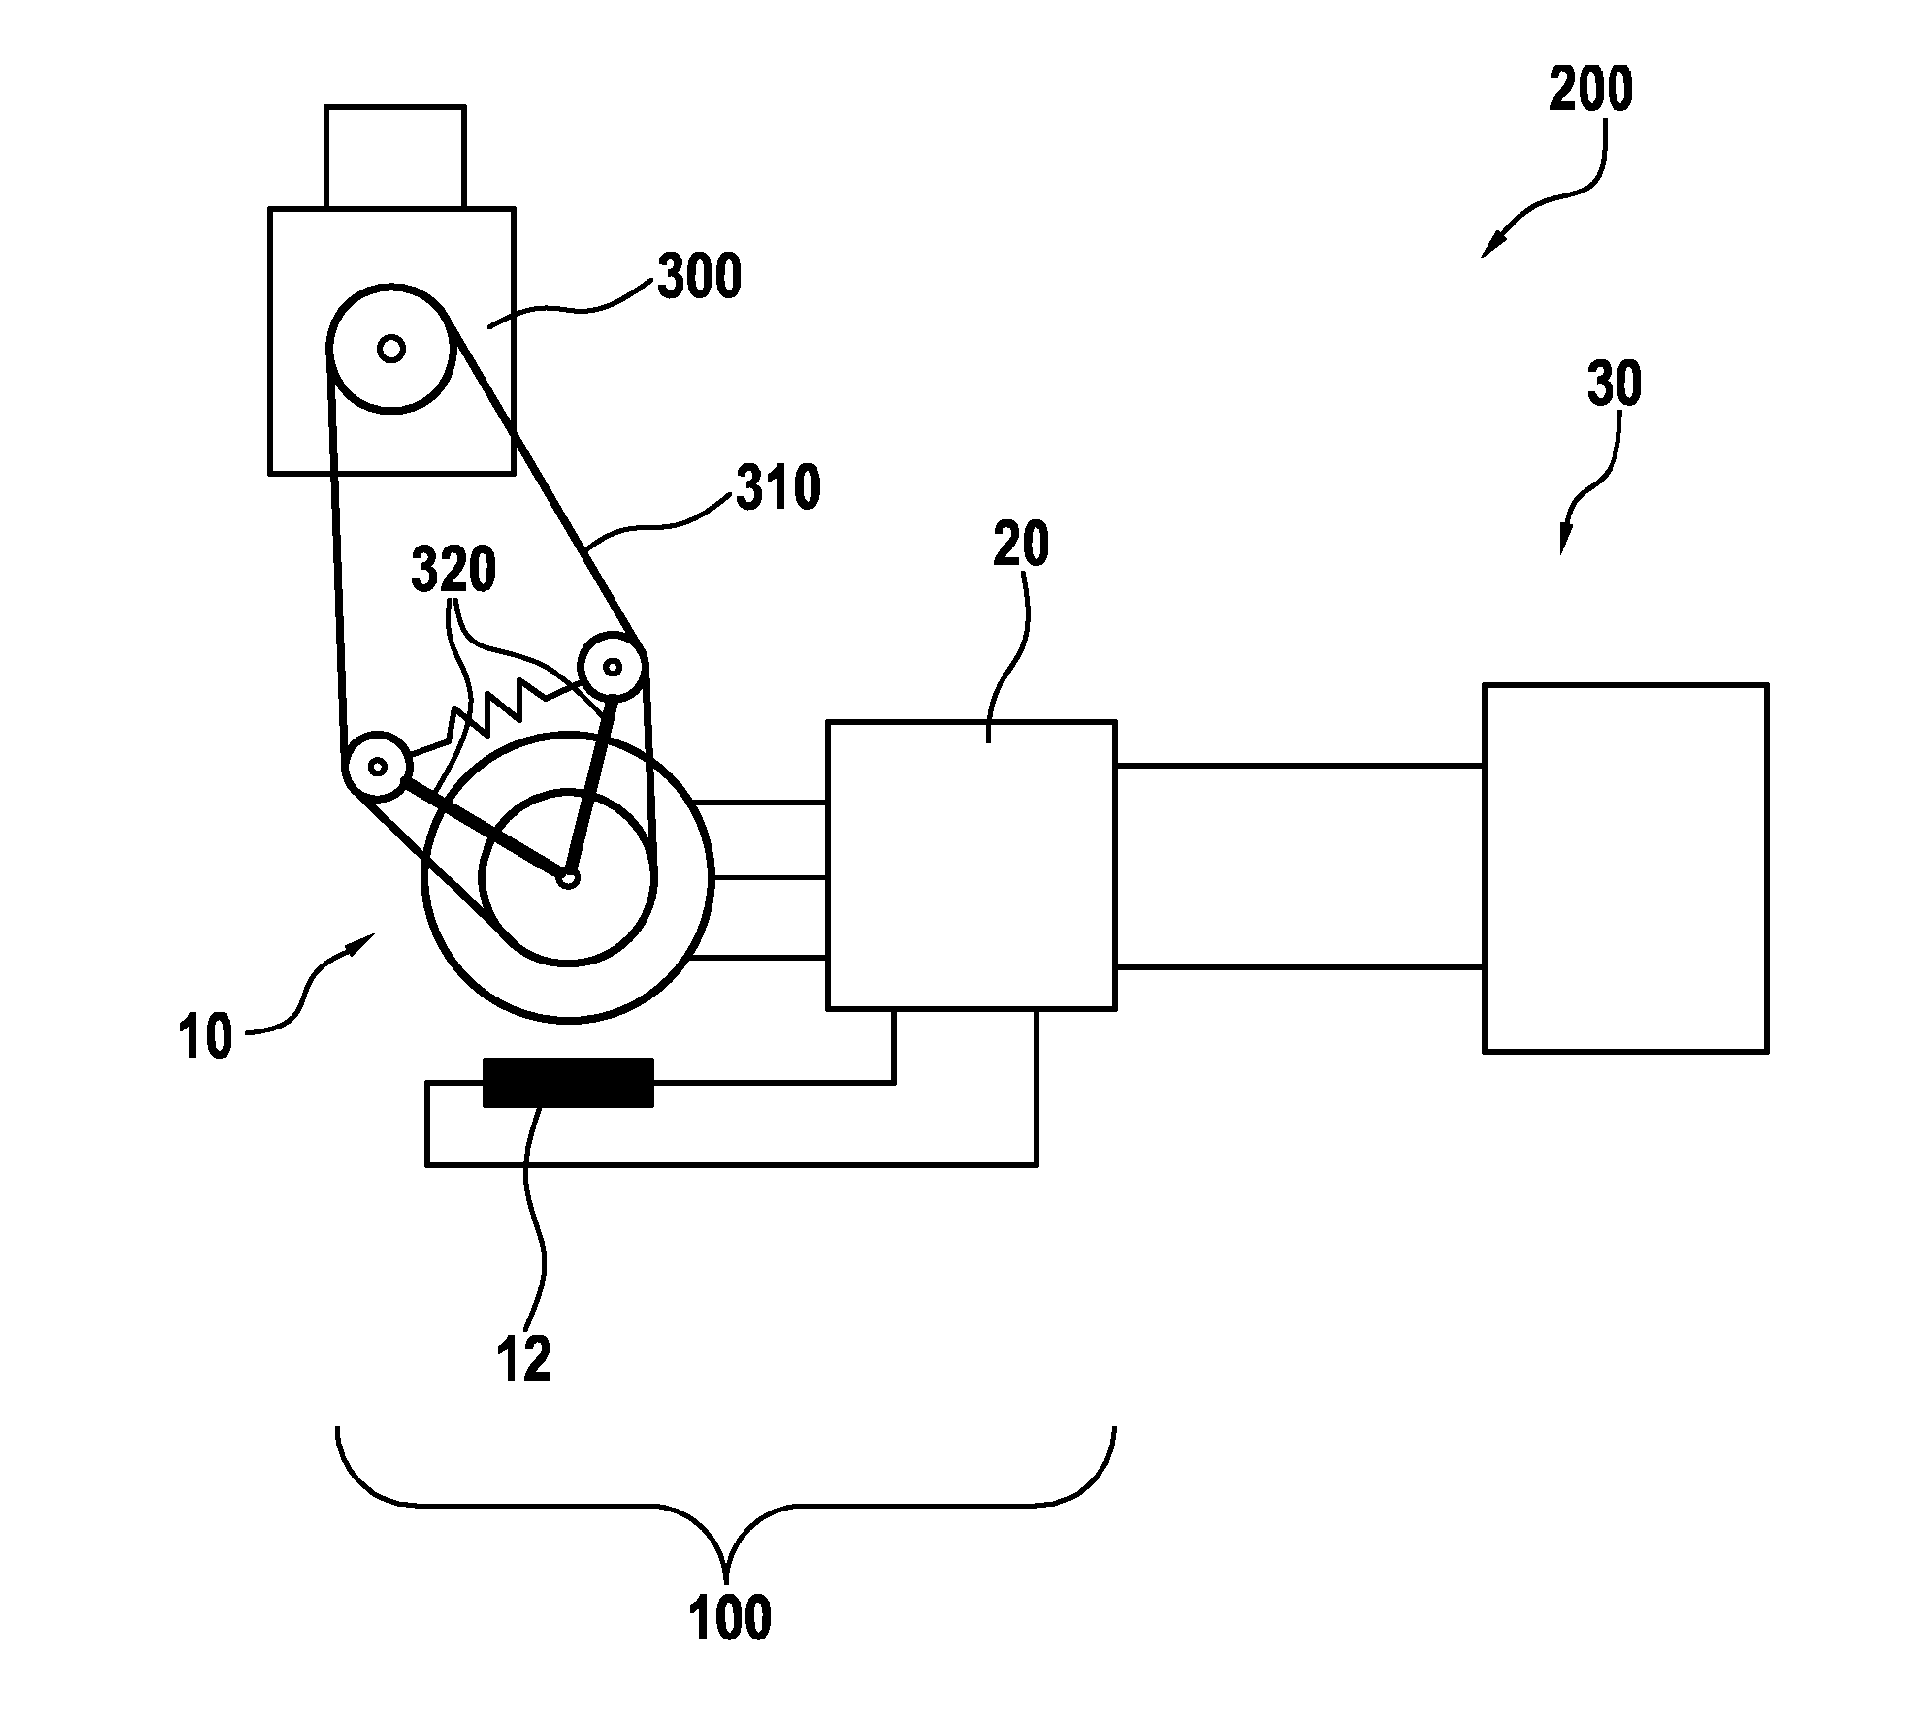 Method for preparing the start-up of an internal combustion engine by means of a belt-driven starter generator